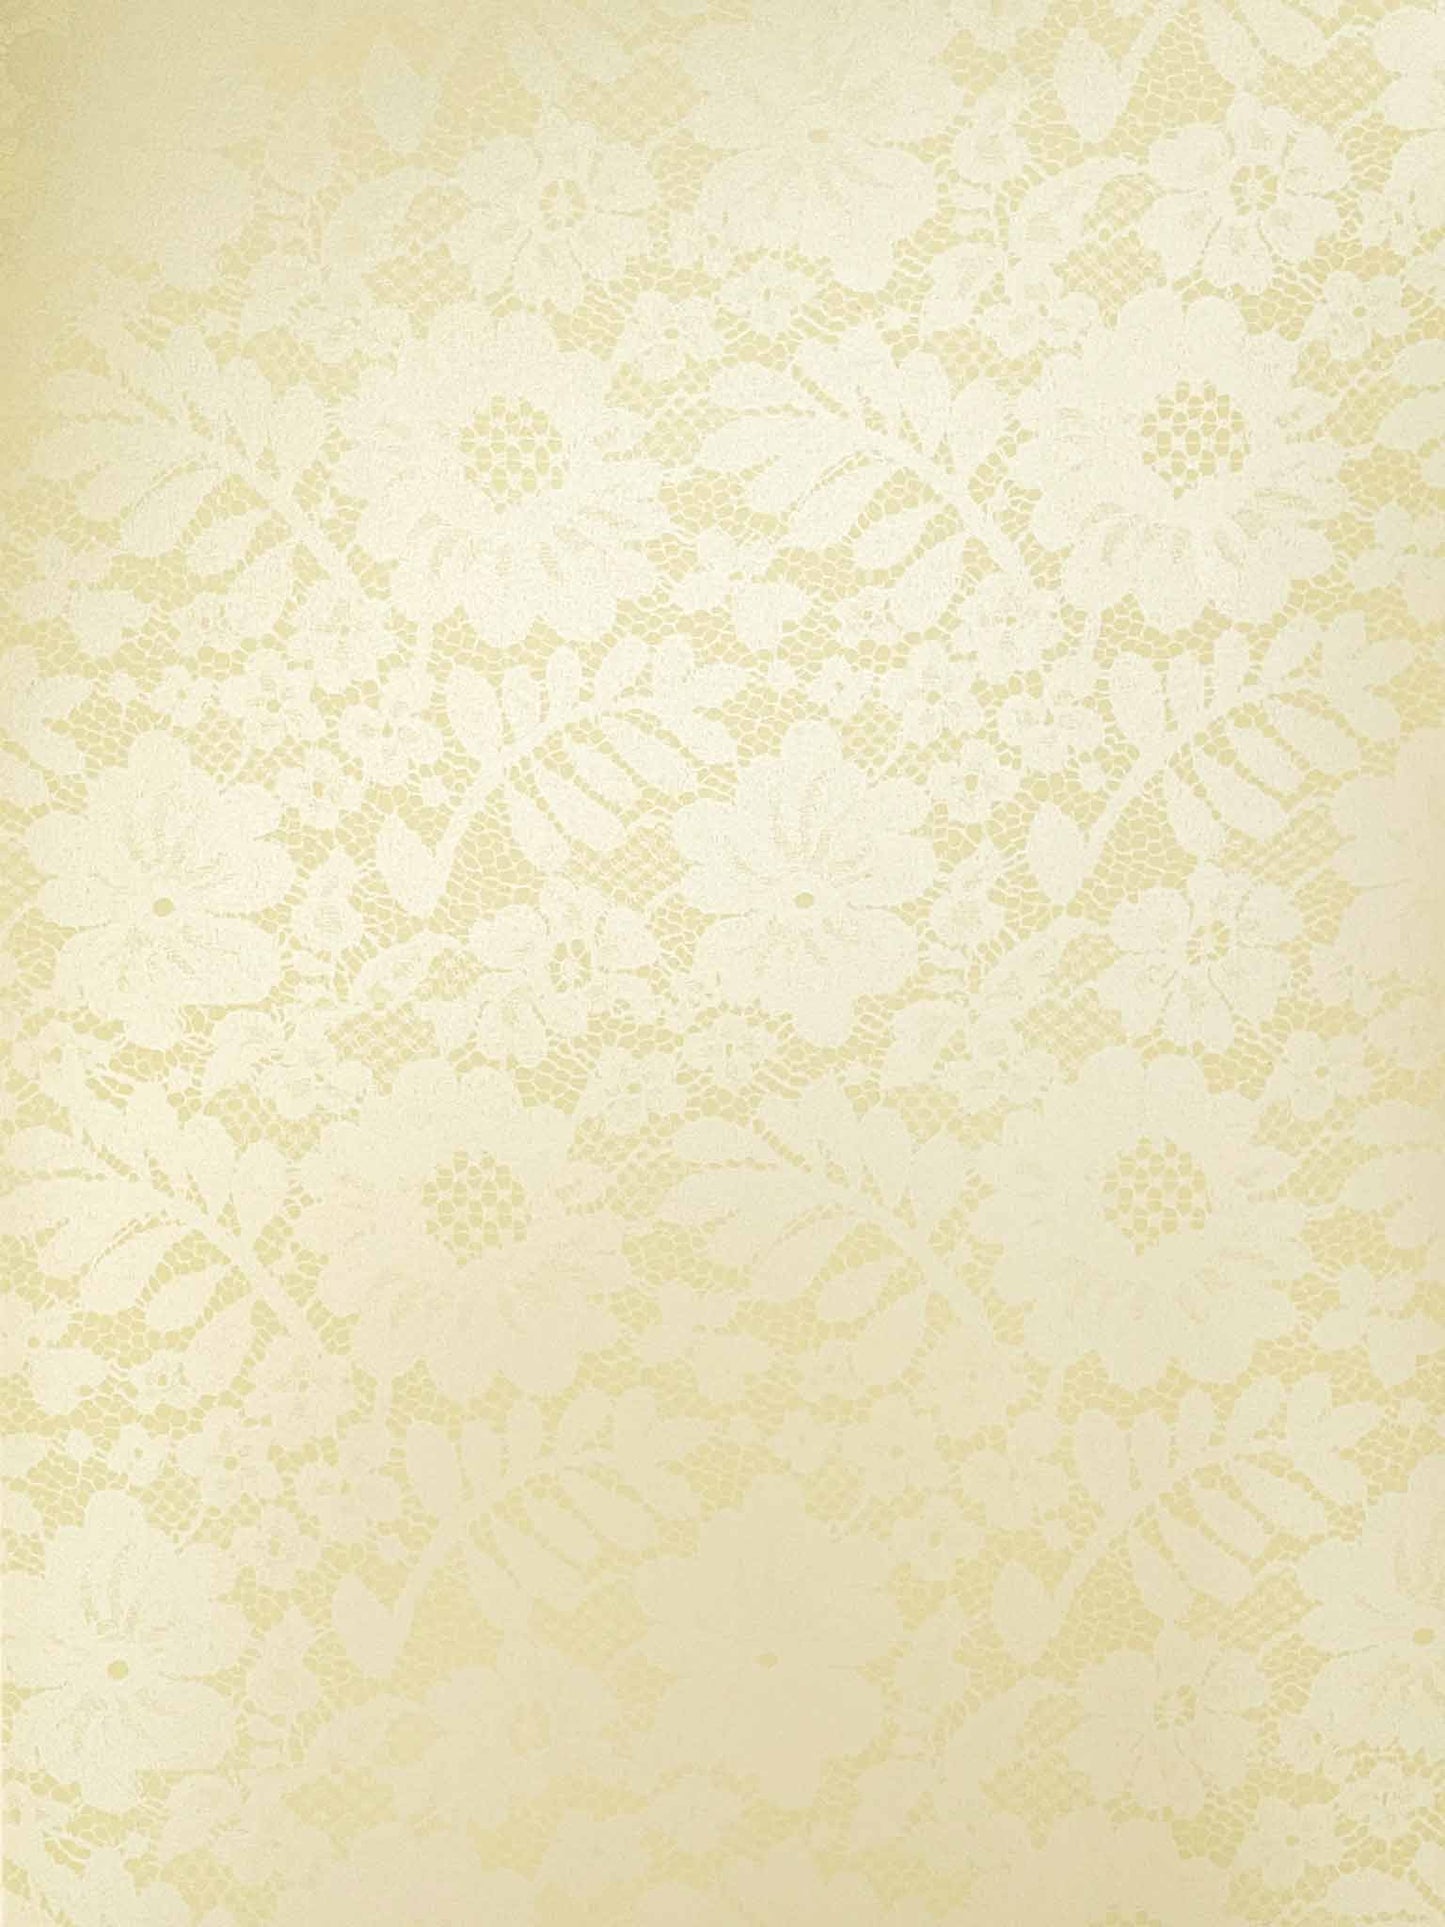 lace-pattern-paper-in-cream-and-ivory